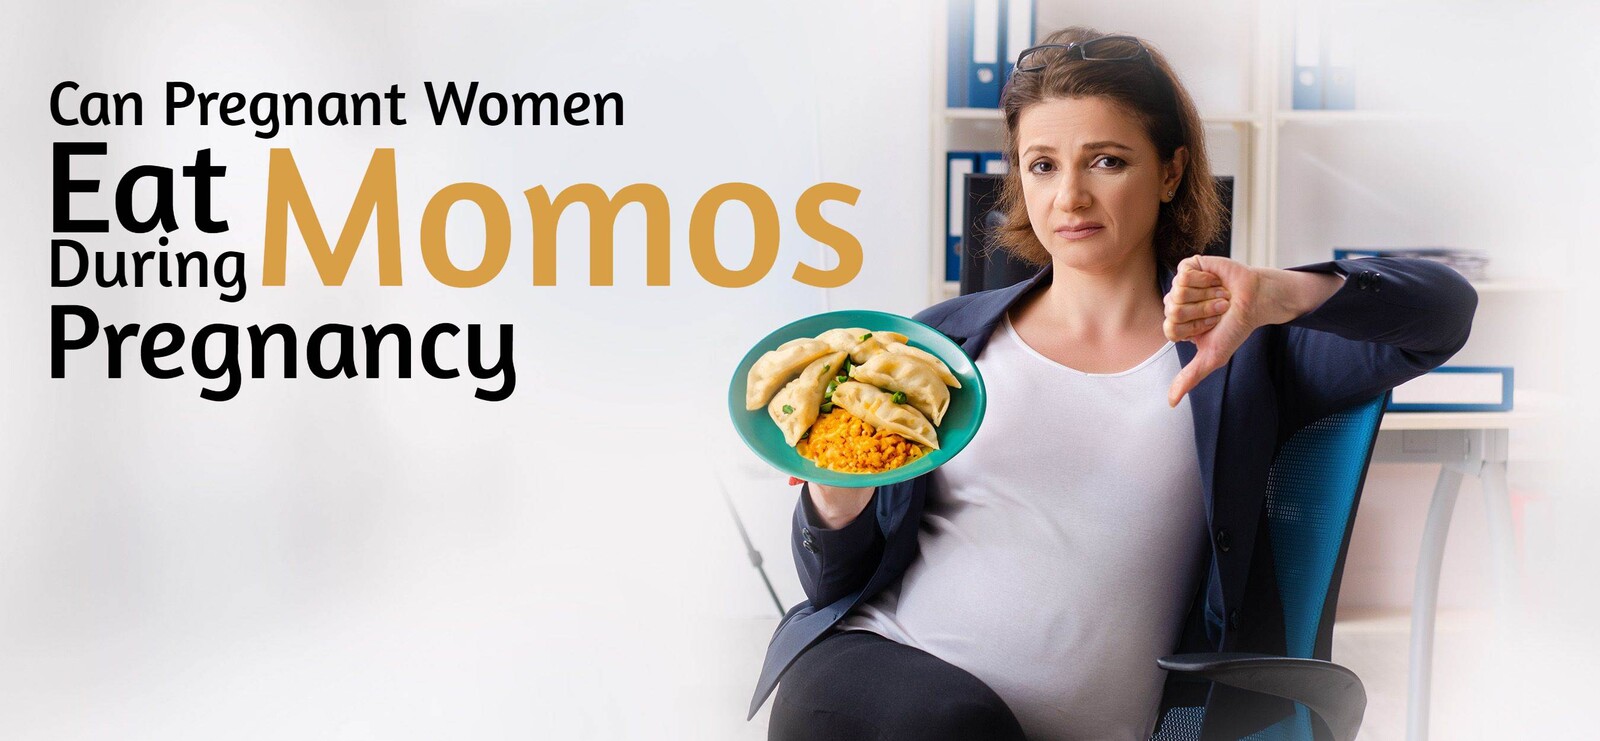 Can We Eat Momos During Pregnancy?